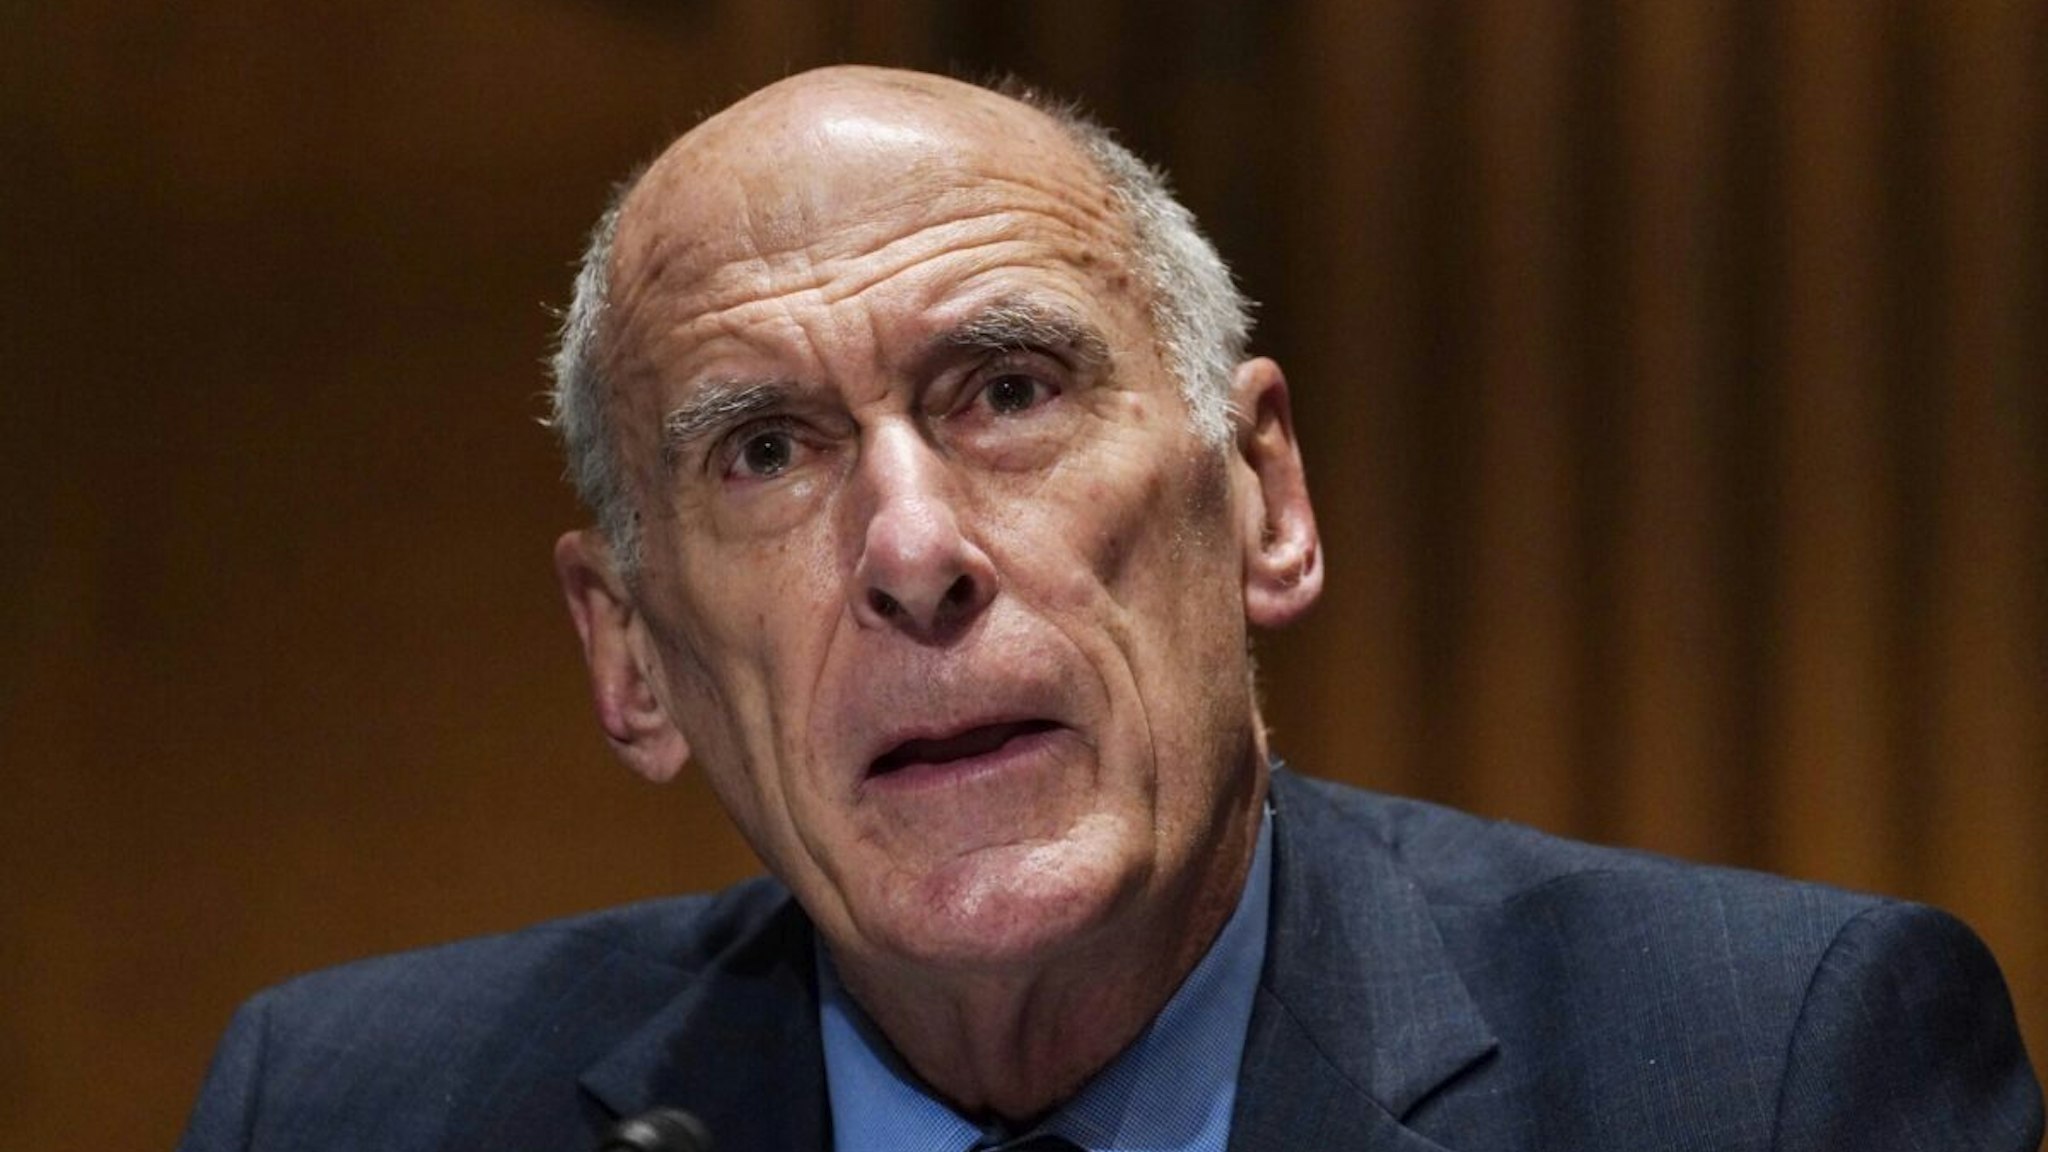 Former Director of National Intelligence Daniel Coats speaks at the confirmation hearing for DNI nominee Avril Haines before the Senate Intelligence Committee on Capitol Hill January 19, 2021 in Washington, DC.